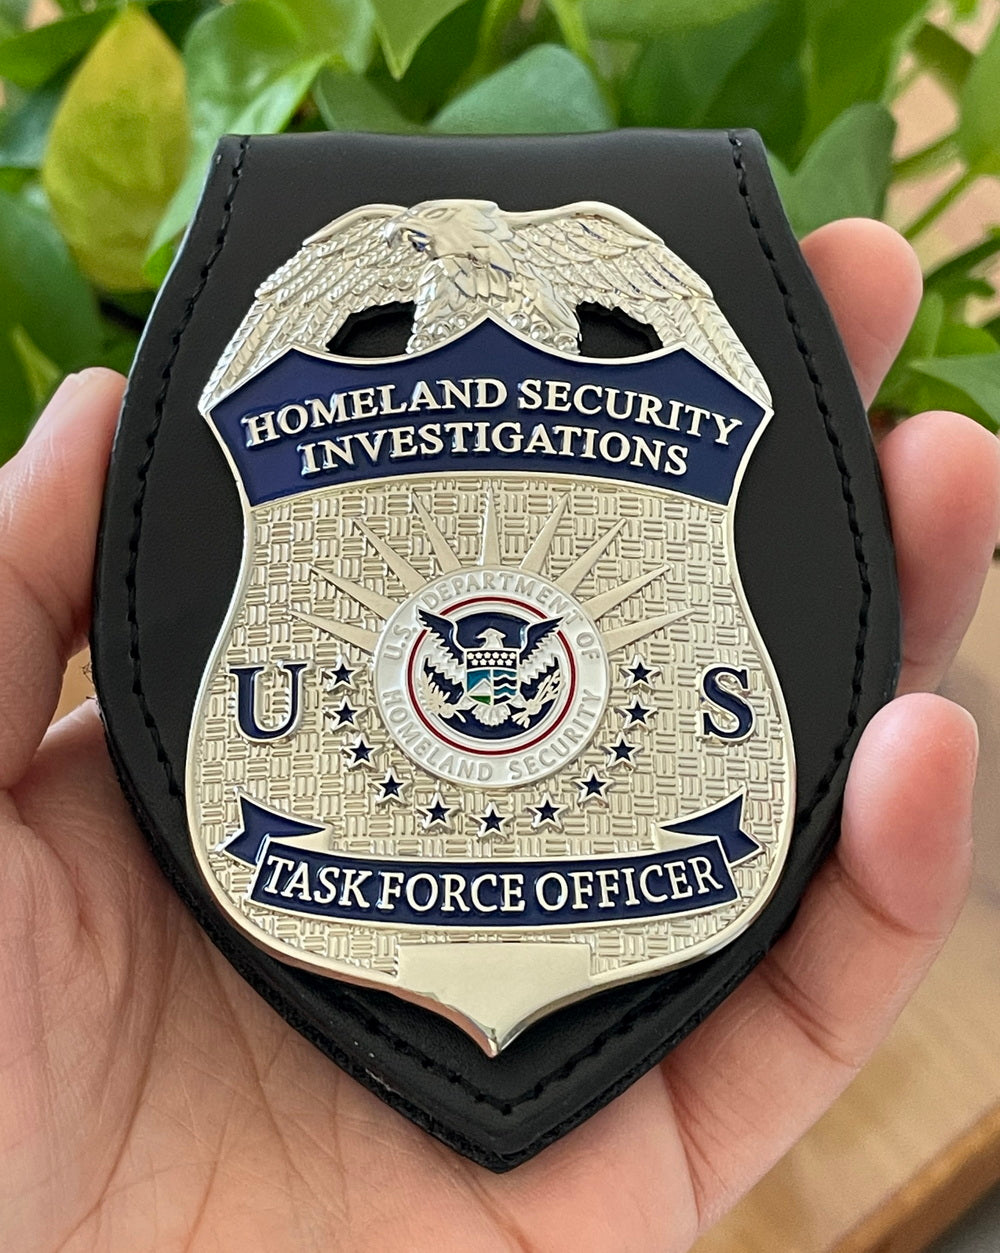 US HSI TFO Task Force Officer Badge Homeland Security Investigations Replica Movie Props Silver